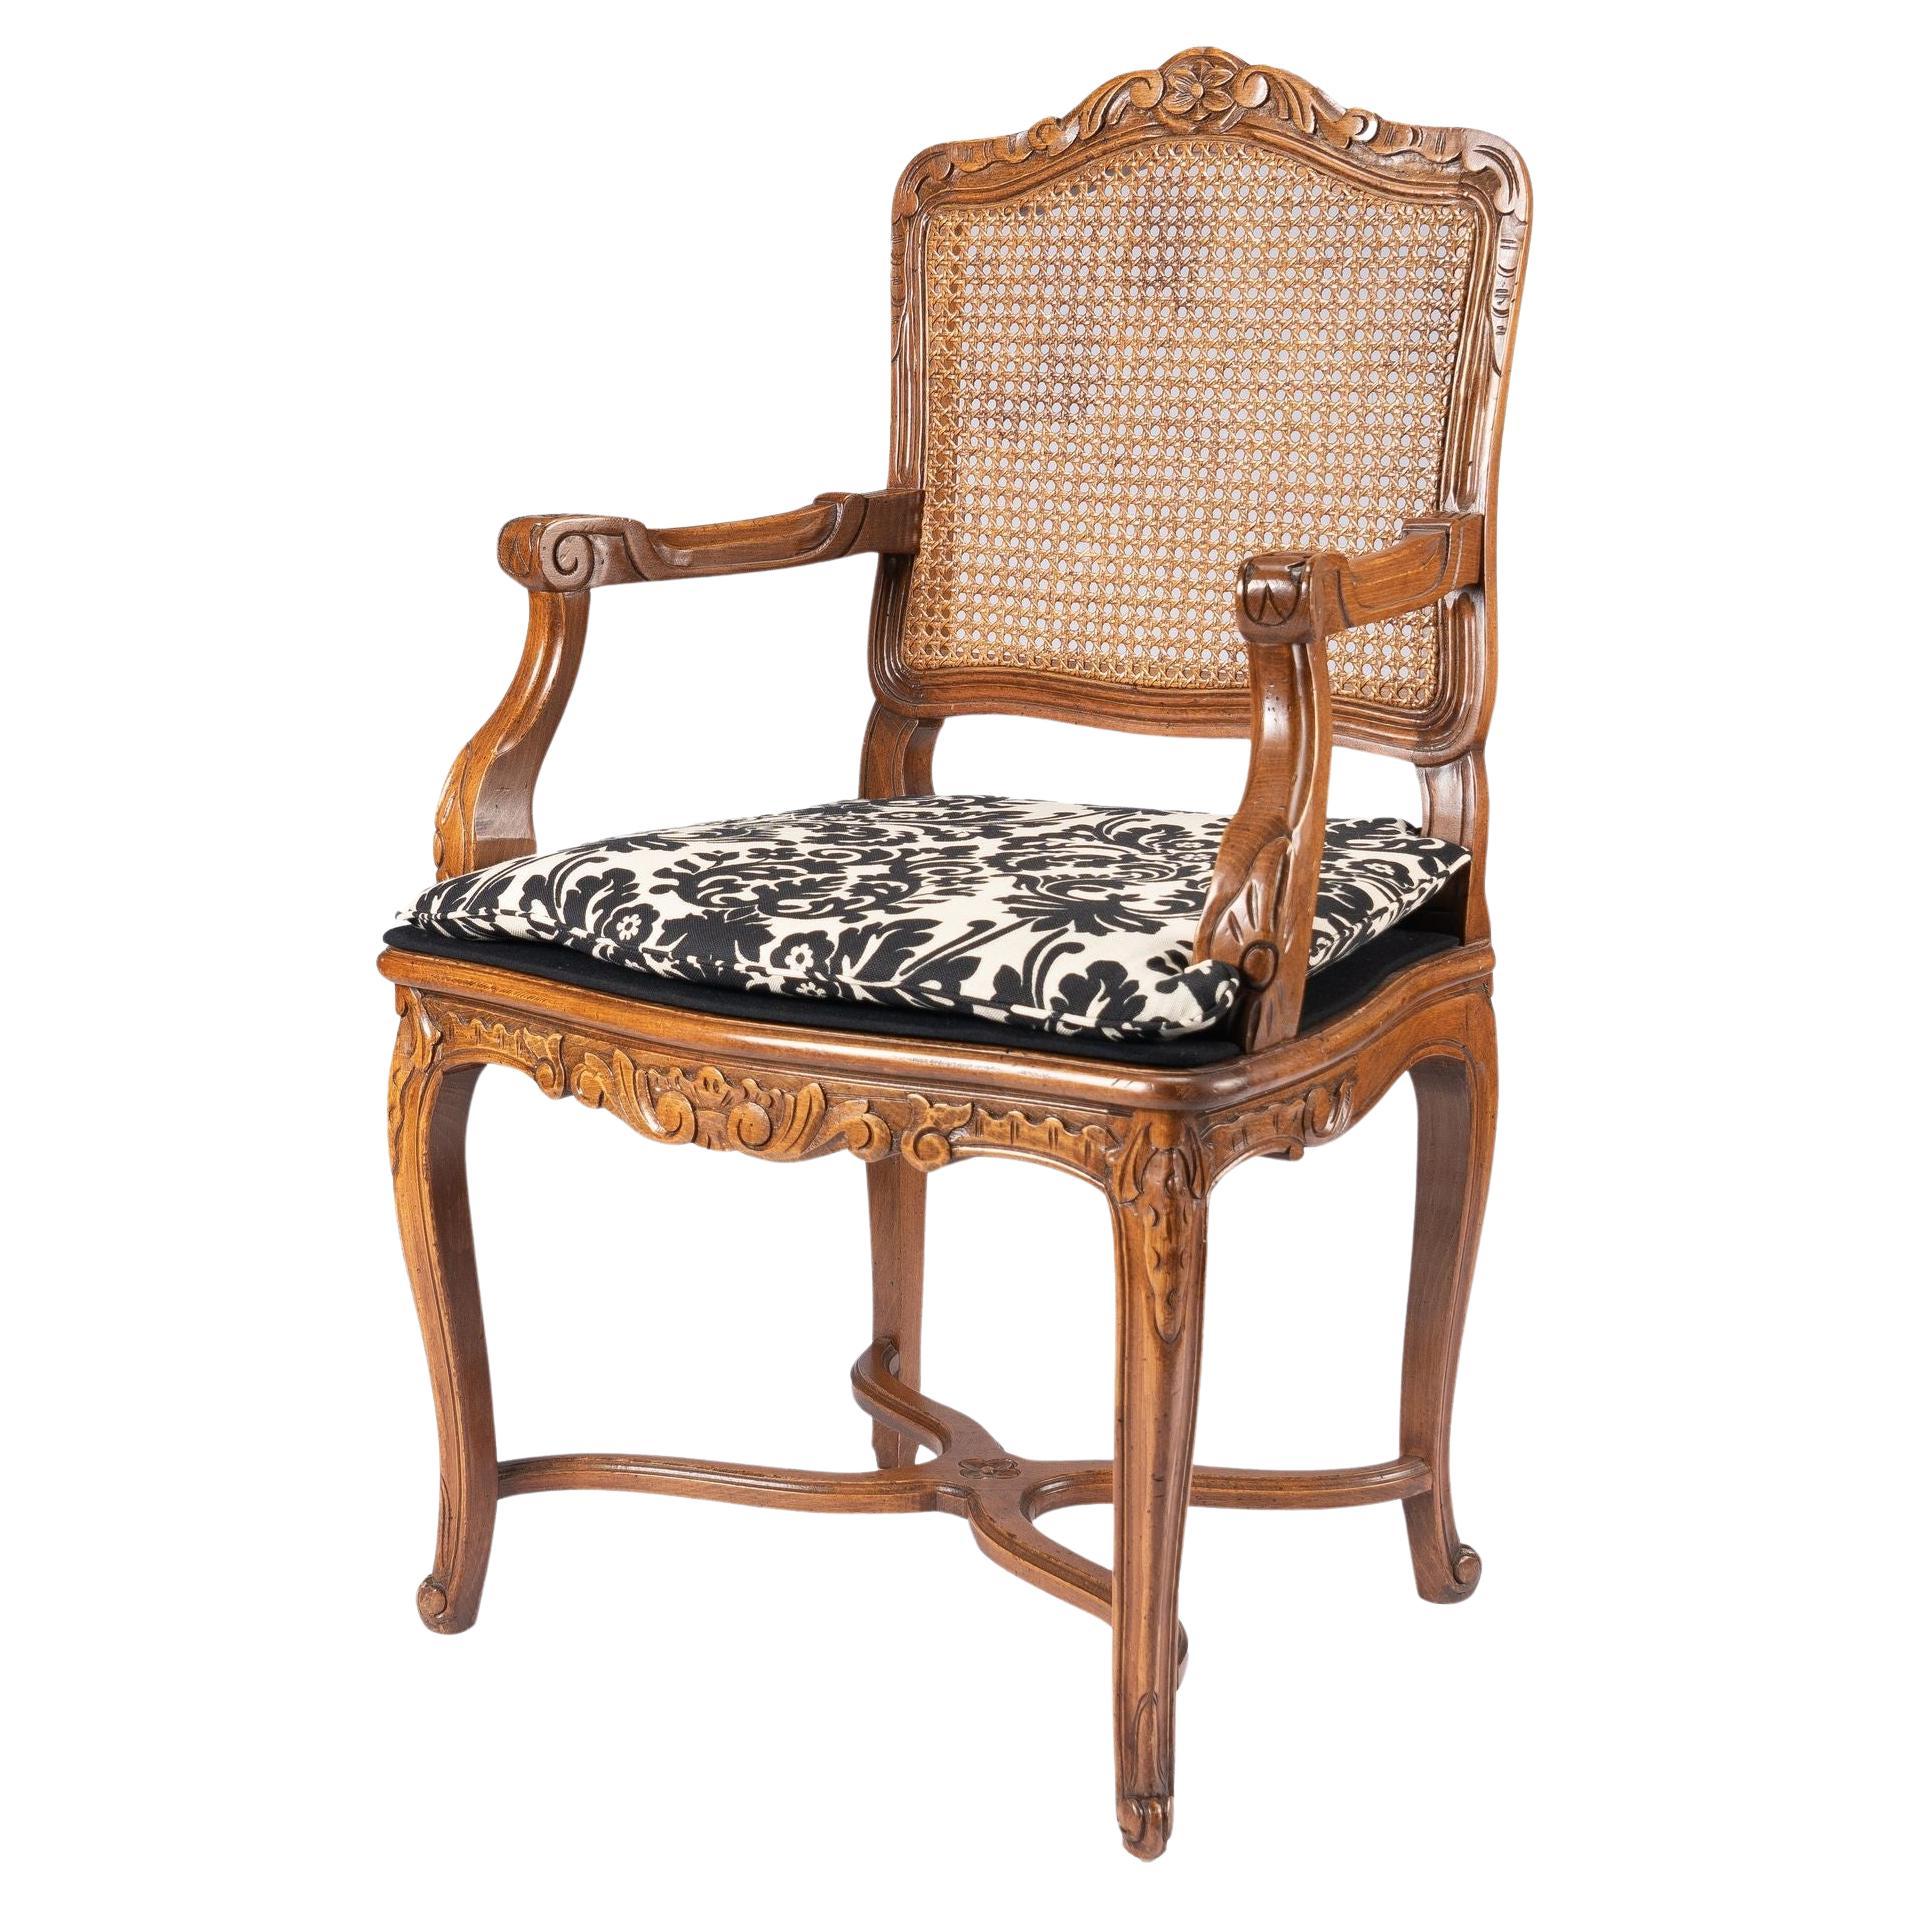 French Louis XVl style fauteuil, c. 1900's For Sale